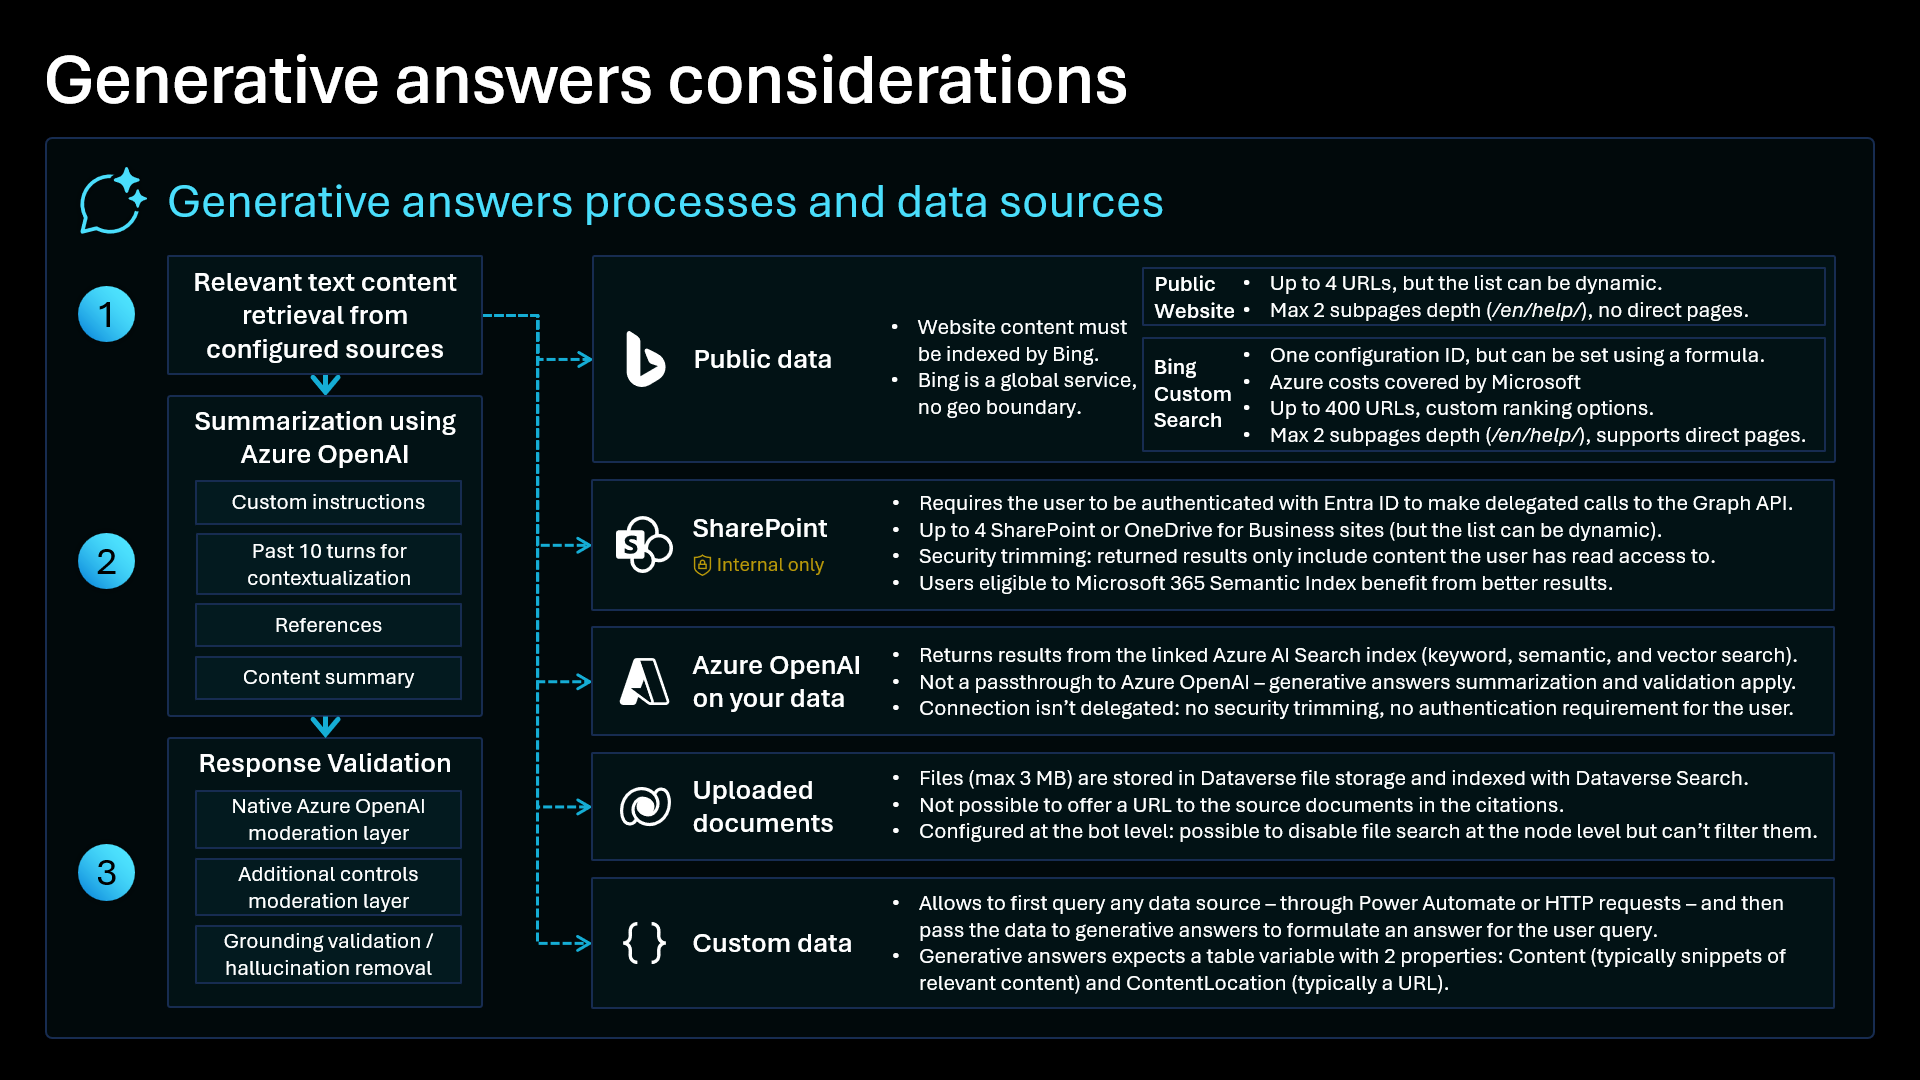 Screenshot of the Generative Answers considerations slide